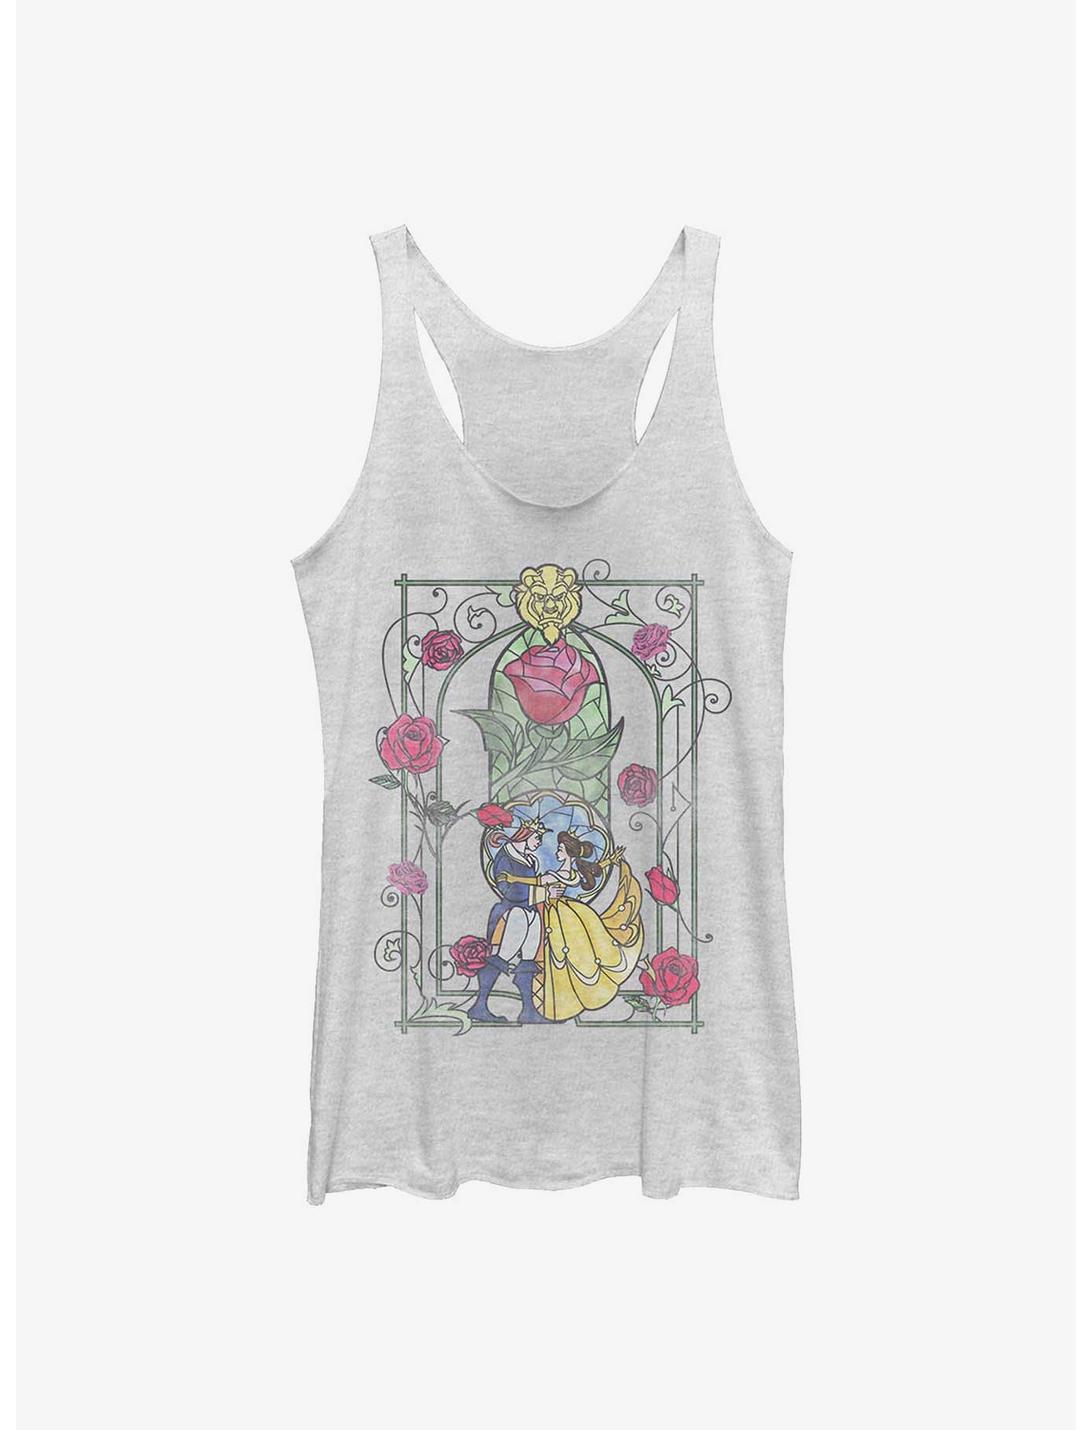 Disney Beauty and the Beast Beauty Dance Womens Tank Top, WHITE HTR, hi-res